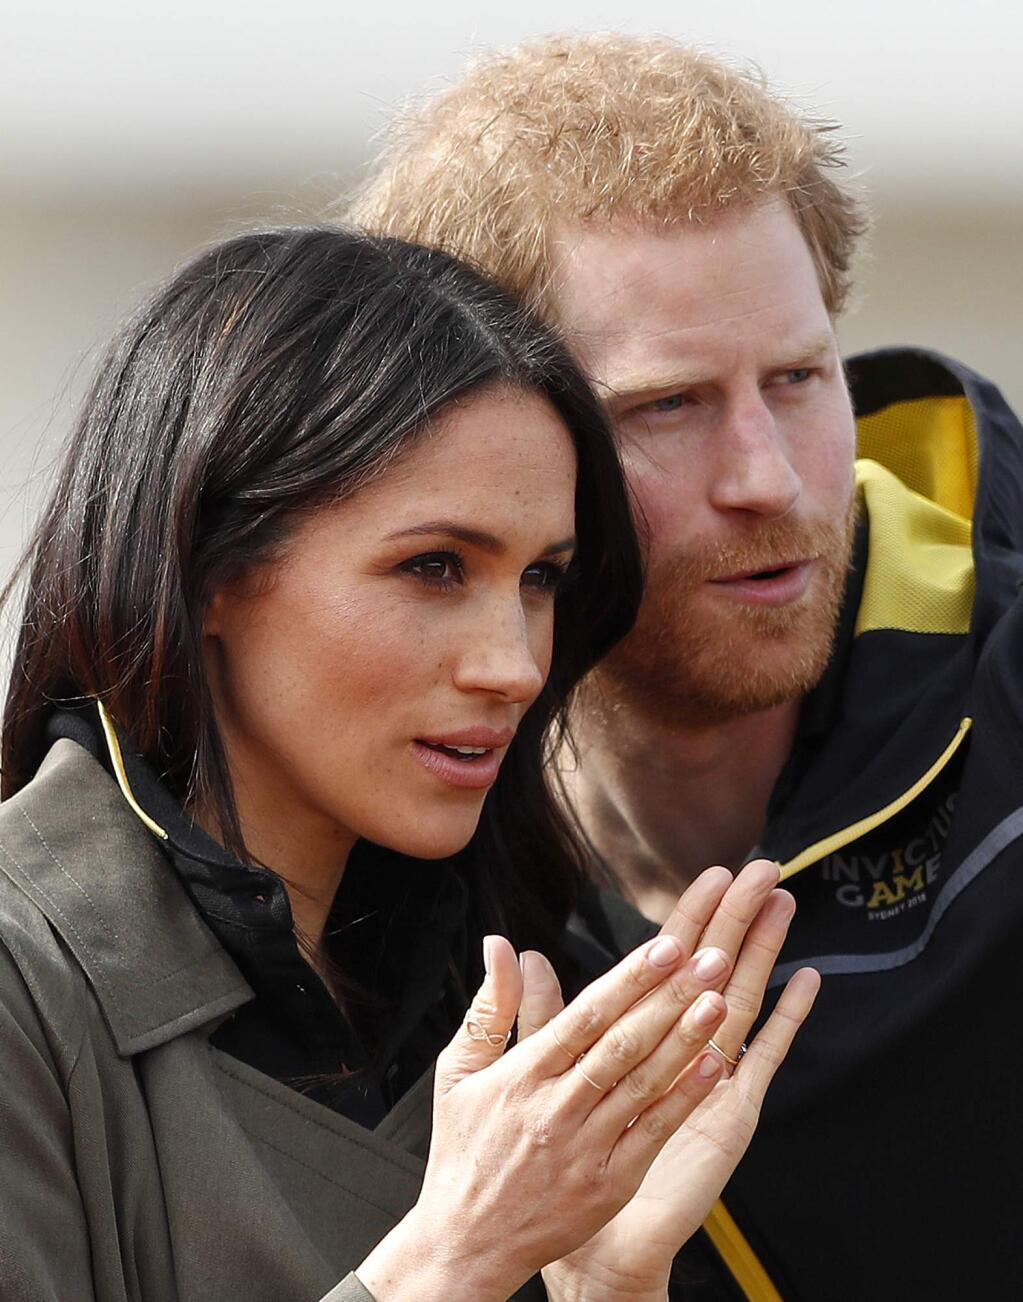 FILE - In this Friday, April 6, 2018 file photo, Britain's Prince Harry and his fiancee Meghan Markle attend the UK team trials for the Invictus Games Sydney 2018 at the University of Bath in Bath, England. Royal wedding organizers on Thursday May 17, 2018, are preparing for a rehearsal of the proceedings to take place in Windsor - but without the bridge and groom. (AP Photo/Frank Augstein, File)